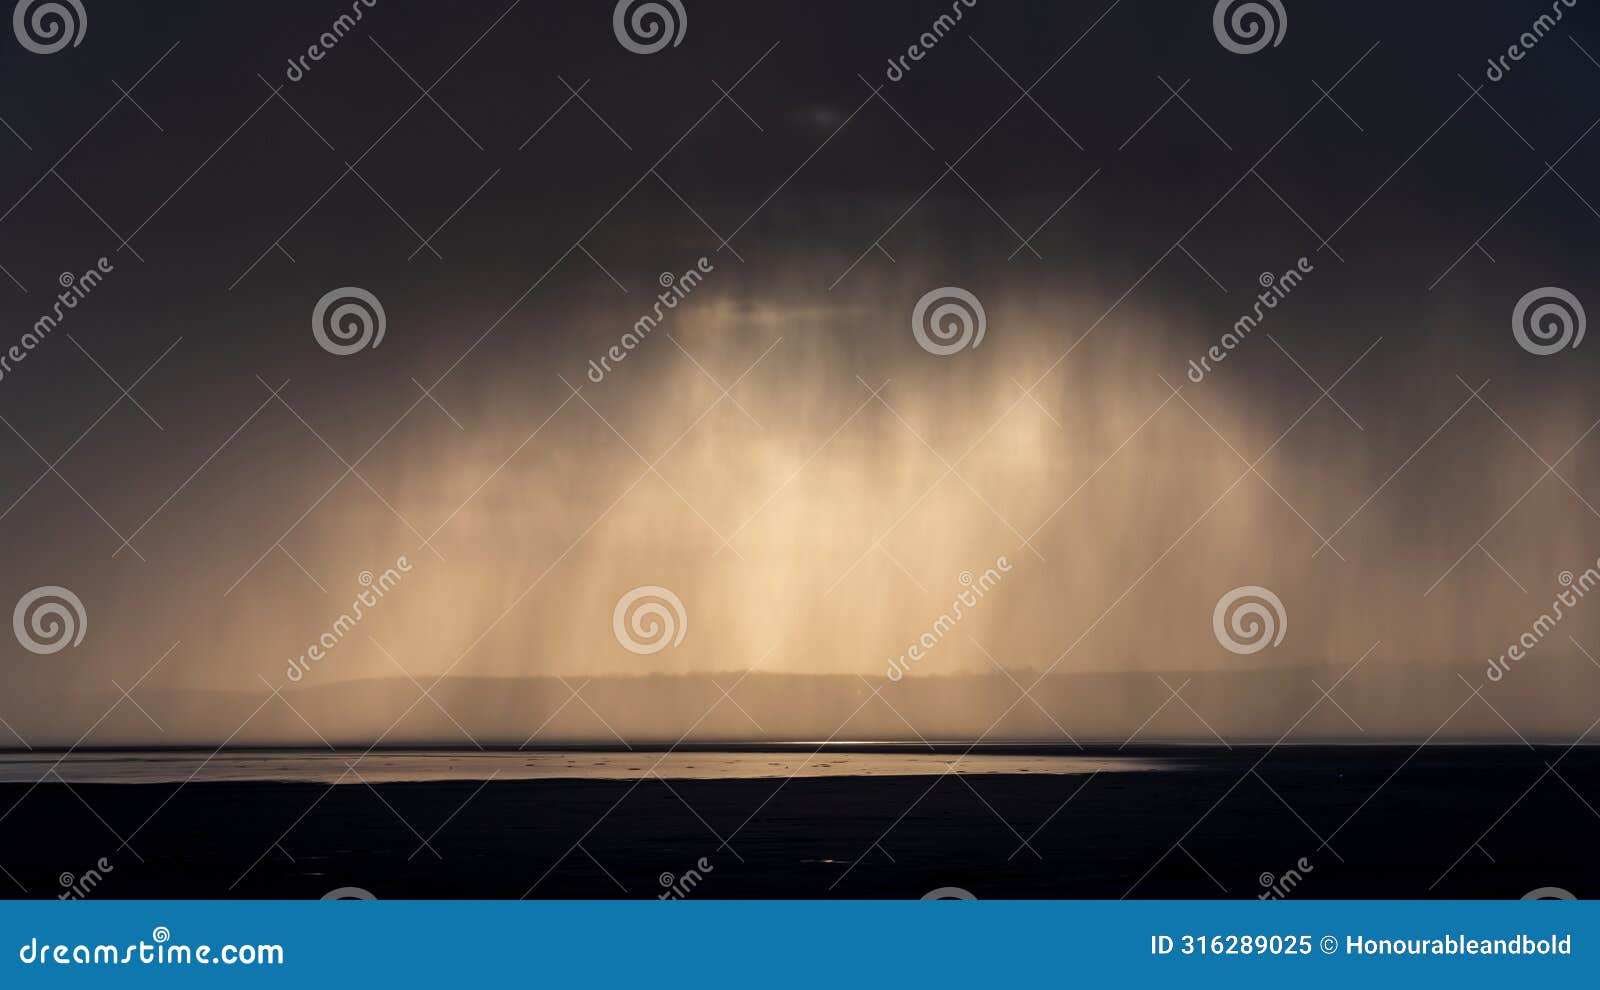 beautiful moody storm skies over ocean landscape with distant heavy rainfall